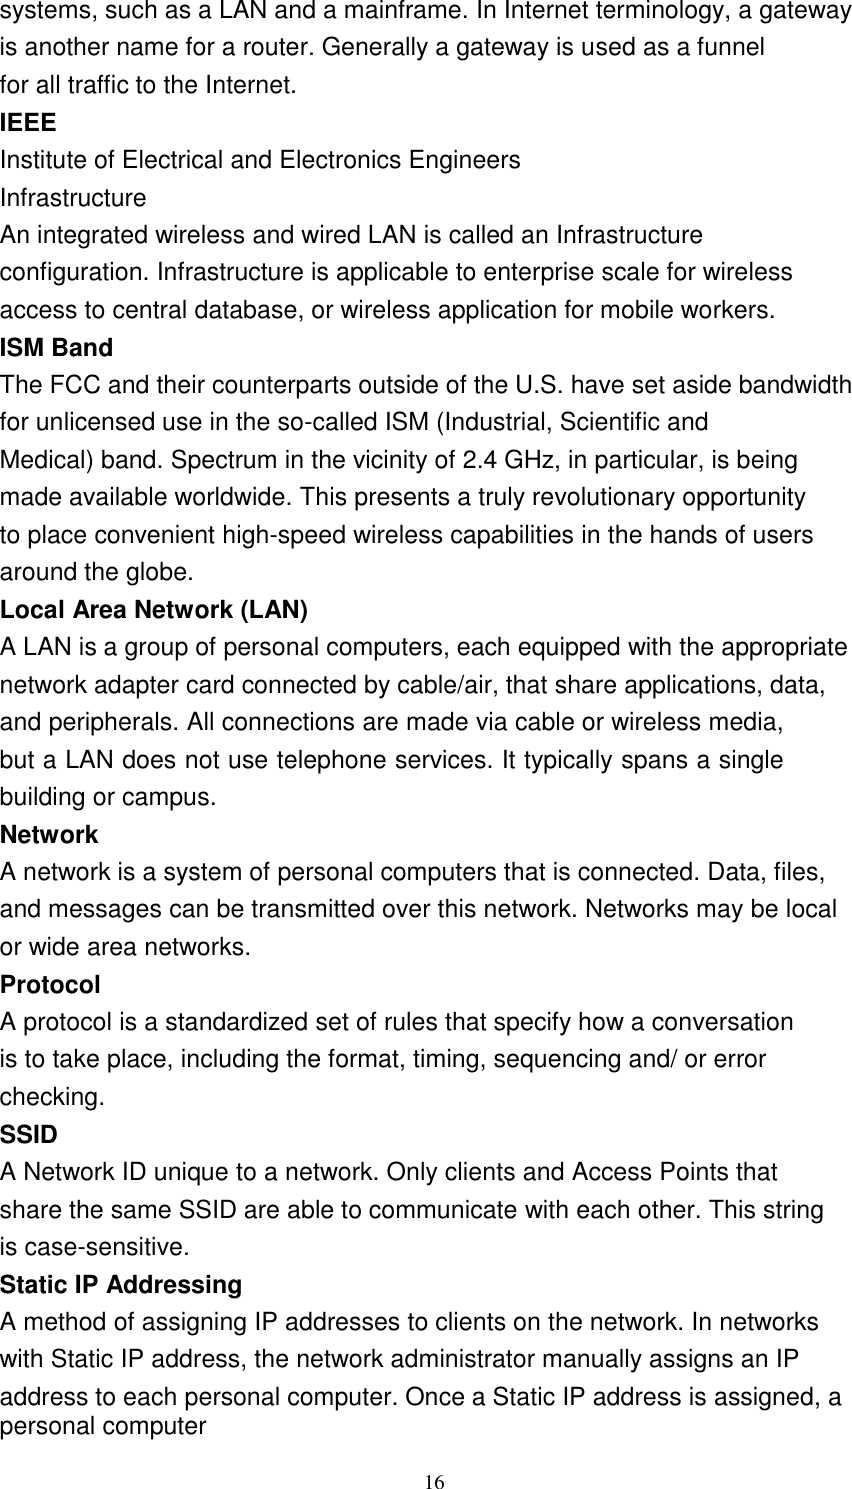 16    systems, such as a LAN and a mainframe. In Internet terminology, a gateway is another name for a router. Generally a gateway is used as a funnel for all traffic to the Internet. IEEE Institute of Electrical and Electronics Engineers Infrastructure An integrated wireless and wired LAN is called an Infrastructure configuration. Infrastructure is applicable to enterprise scale for wireless access to central database, or wireless application for mobile workers. ISM Band The FCC and their counterparts outside of the U.S. have set aside bandwidth for unlicensed use in the so-called ISM (Industrial, Scientific and Medical) band. Spectrum in the vicinity of 2.4 GHz, in particular, is being made available worldwide. This presents a truly revolutionary opportunity to place convenient high-speed wireless capabilities in the hands of users around the globe. Local Area Network (LAN) A LAN is a group of personal computers, each equipped with the appropriate network adapter card connected by cable/air, that share applications, data, and peripherals. All connections are made via cable or wireless media, but a LAN does not use telephone services. It typically spans a single building or campus. Network A network is a system of personal computers that is connected. Data, files, and messages can be transmitted over this network. Networks may be local or wide area networks. Protocol A protocol is a standardized set of rules that specify how a conversation is to take place, including the format, timing, sequencing and/ or error checking. SSID A Network ID unique to a network. Only clients and Access Points that share the same SSID are able to communicate with each other. This string is case-sensitive. Static IP Addressing A method of assigning IP addresses to clients on the network. In networks with Static IP address, the network administrator manually assigns an IP address to each personal computer. Once a Static IP address is assigned, a personal computer 